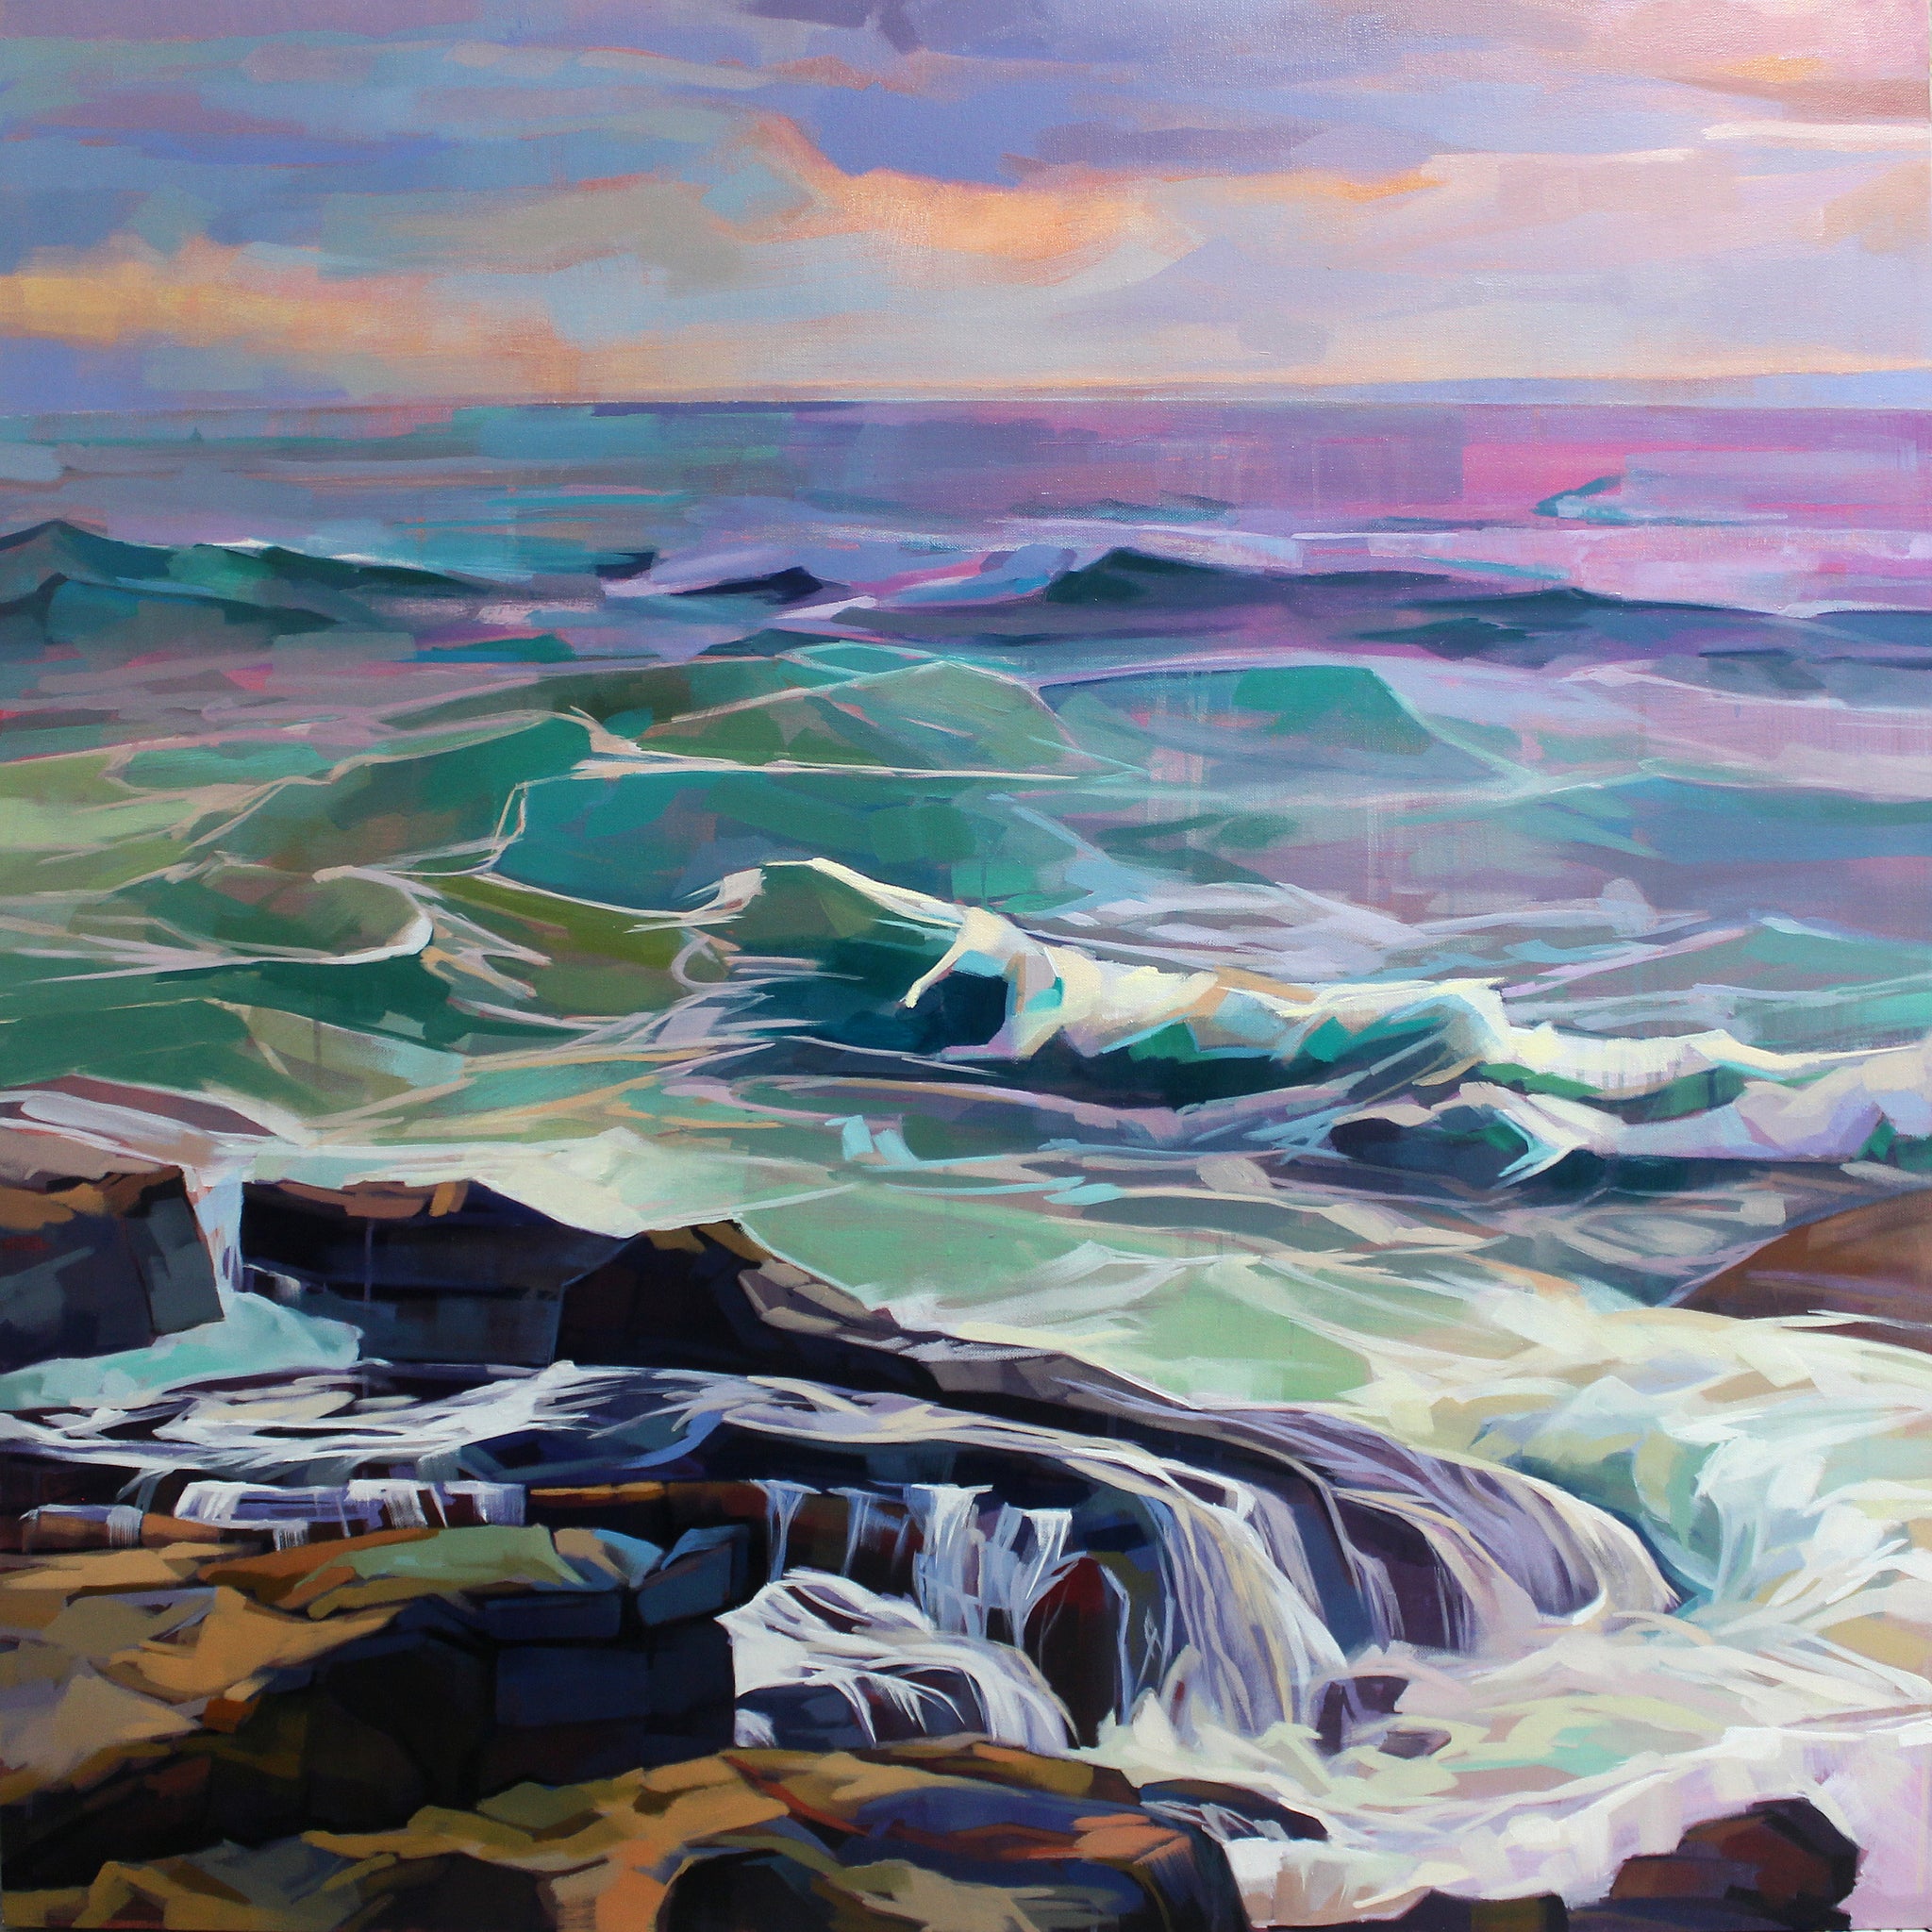 Creevy, Storm Eleanor - Contemporary art from Ireland. Paintings & prints by Irish seascape & landscape artist Kevin Lowery.